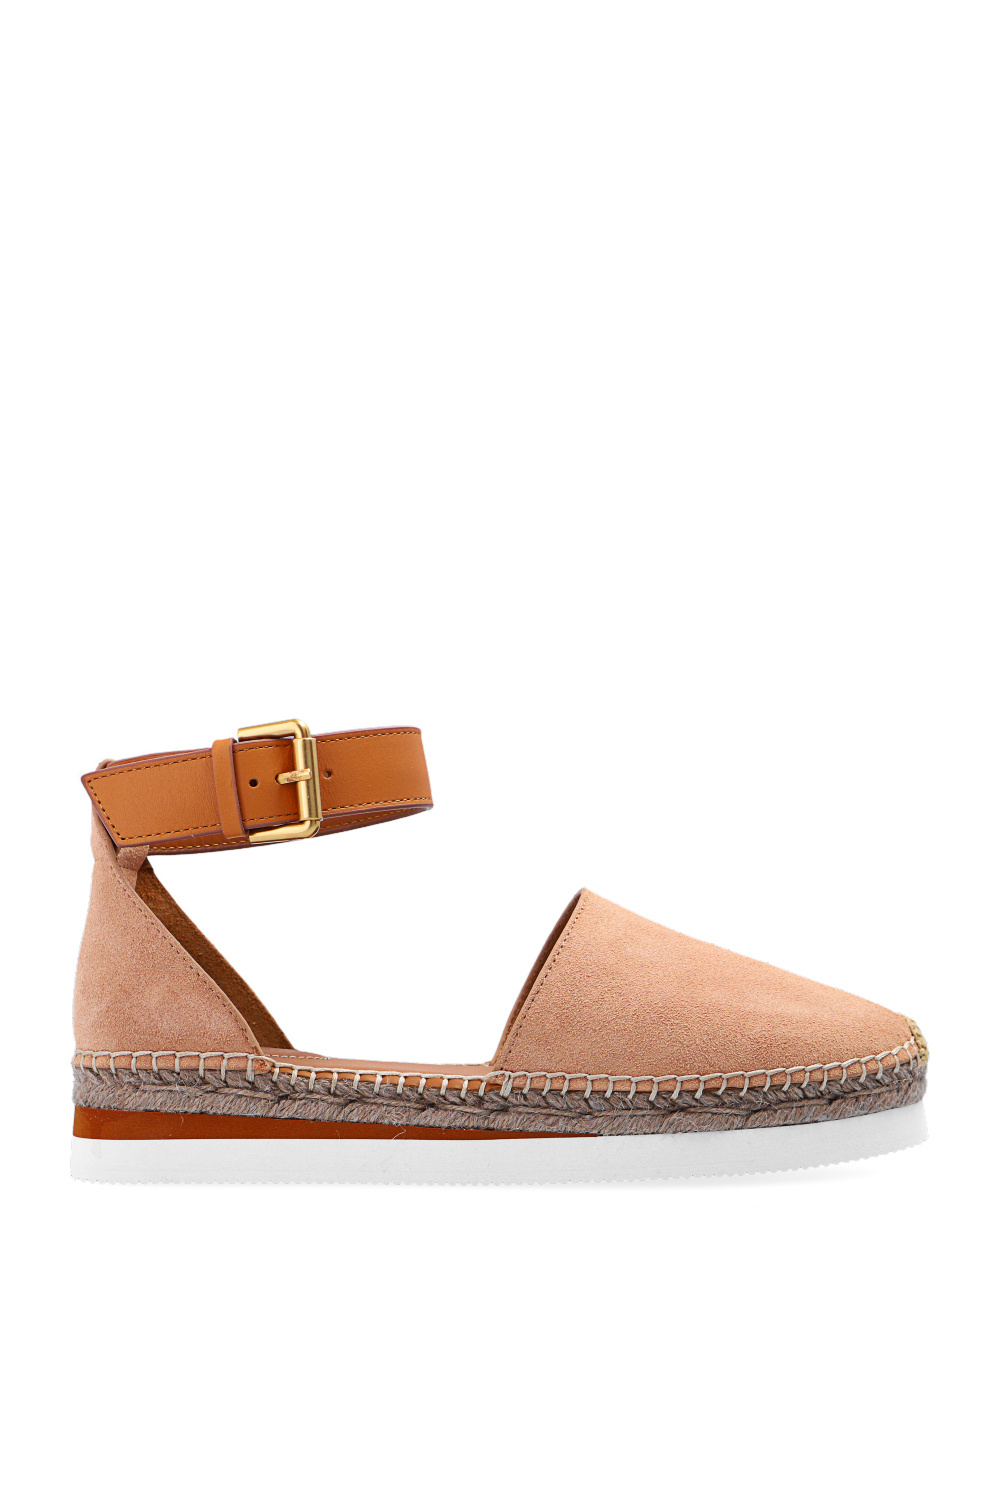 See By Chloé ‘Glyn’ espadrilles with cut-out